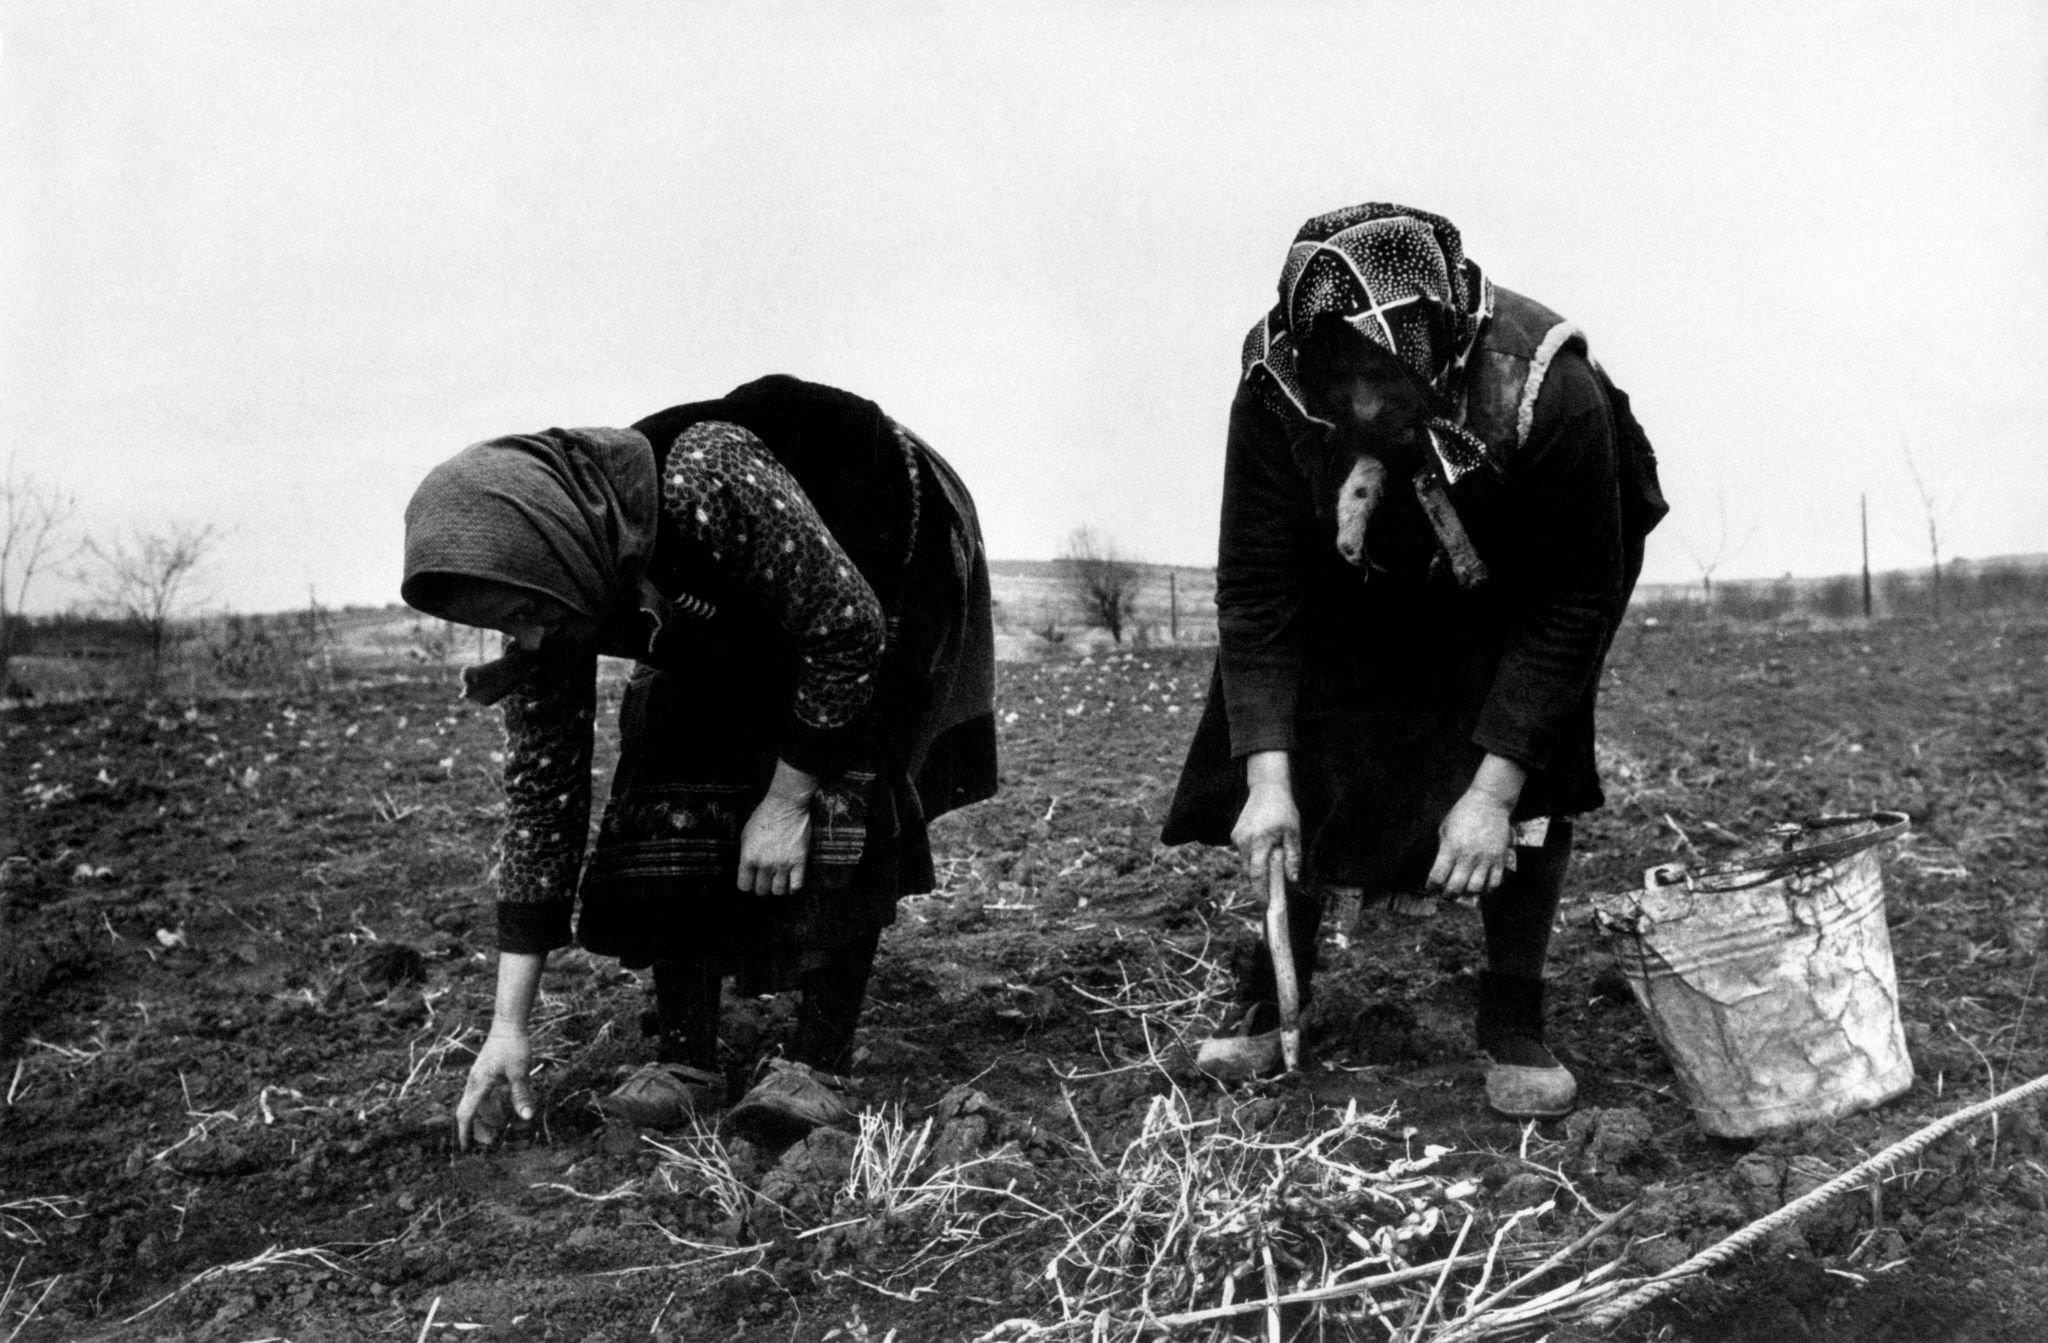 Two countrywomen at work, crouched on a field they are turning over, 20 km far from the capital city of Belgrade, Serbia, 1965